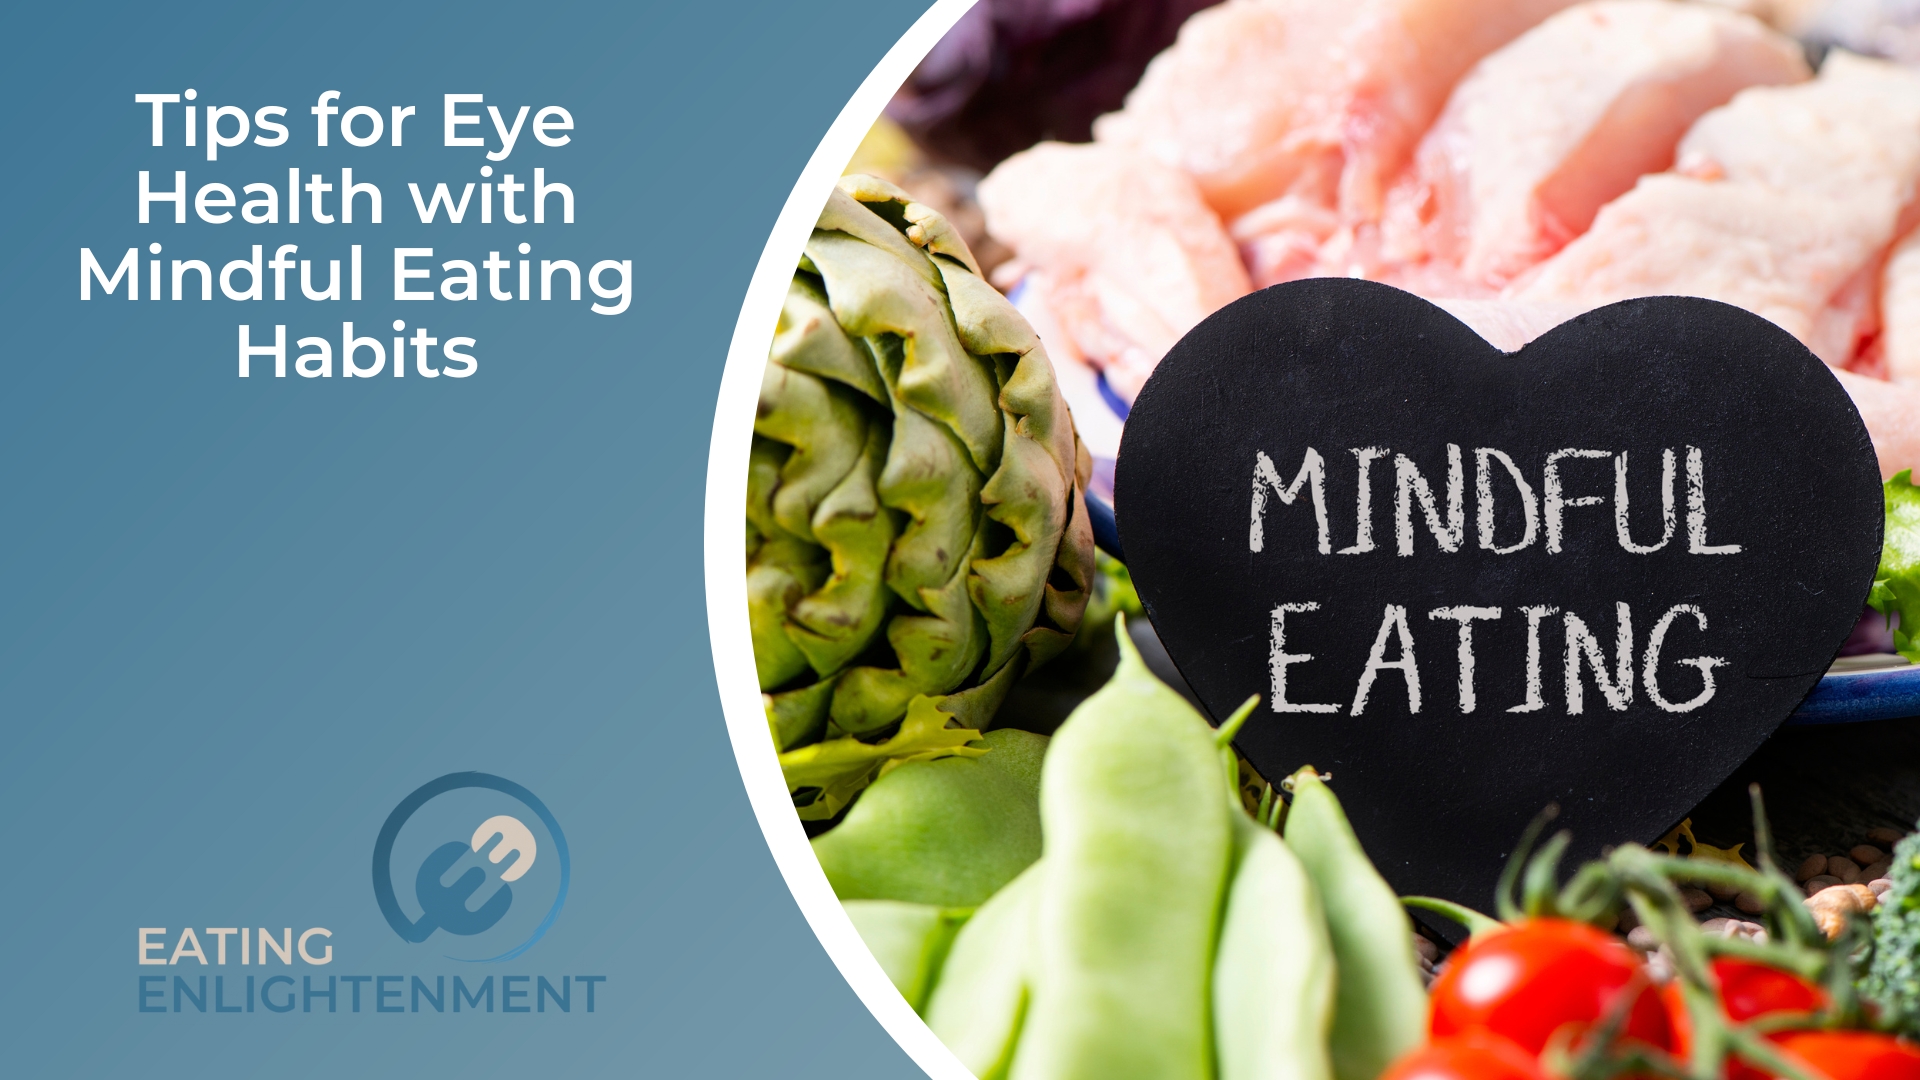 Tips for Eye Health with Mindful Eating Habits